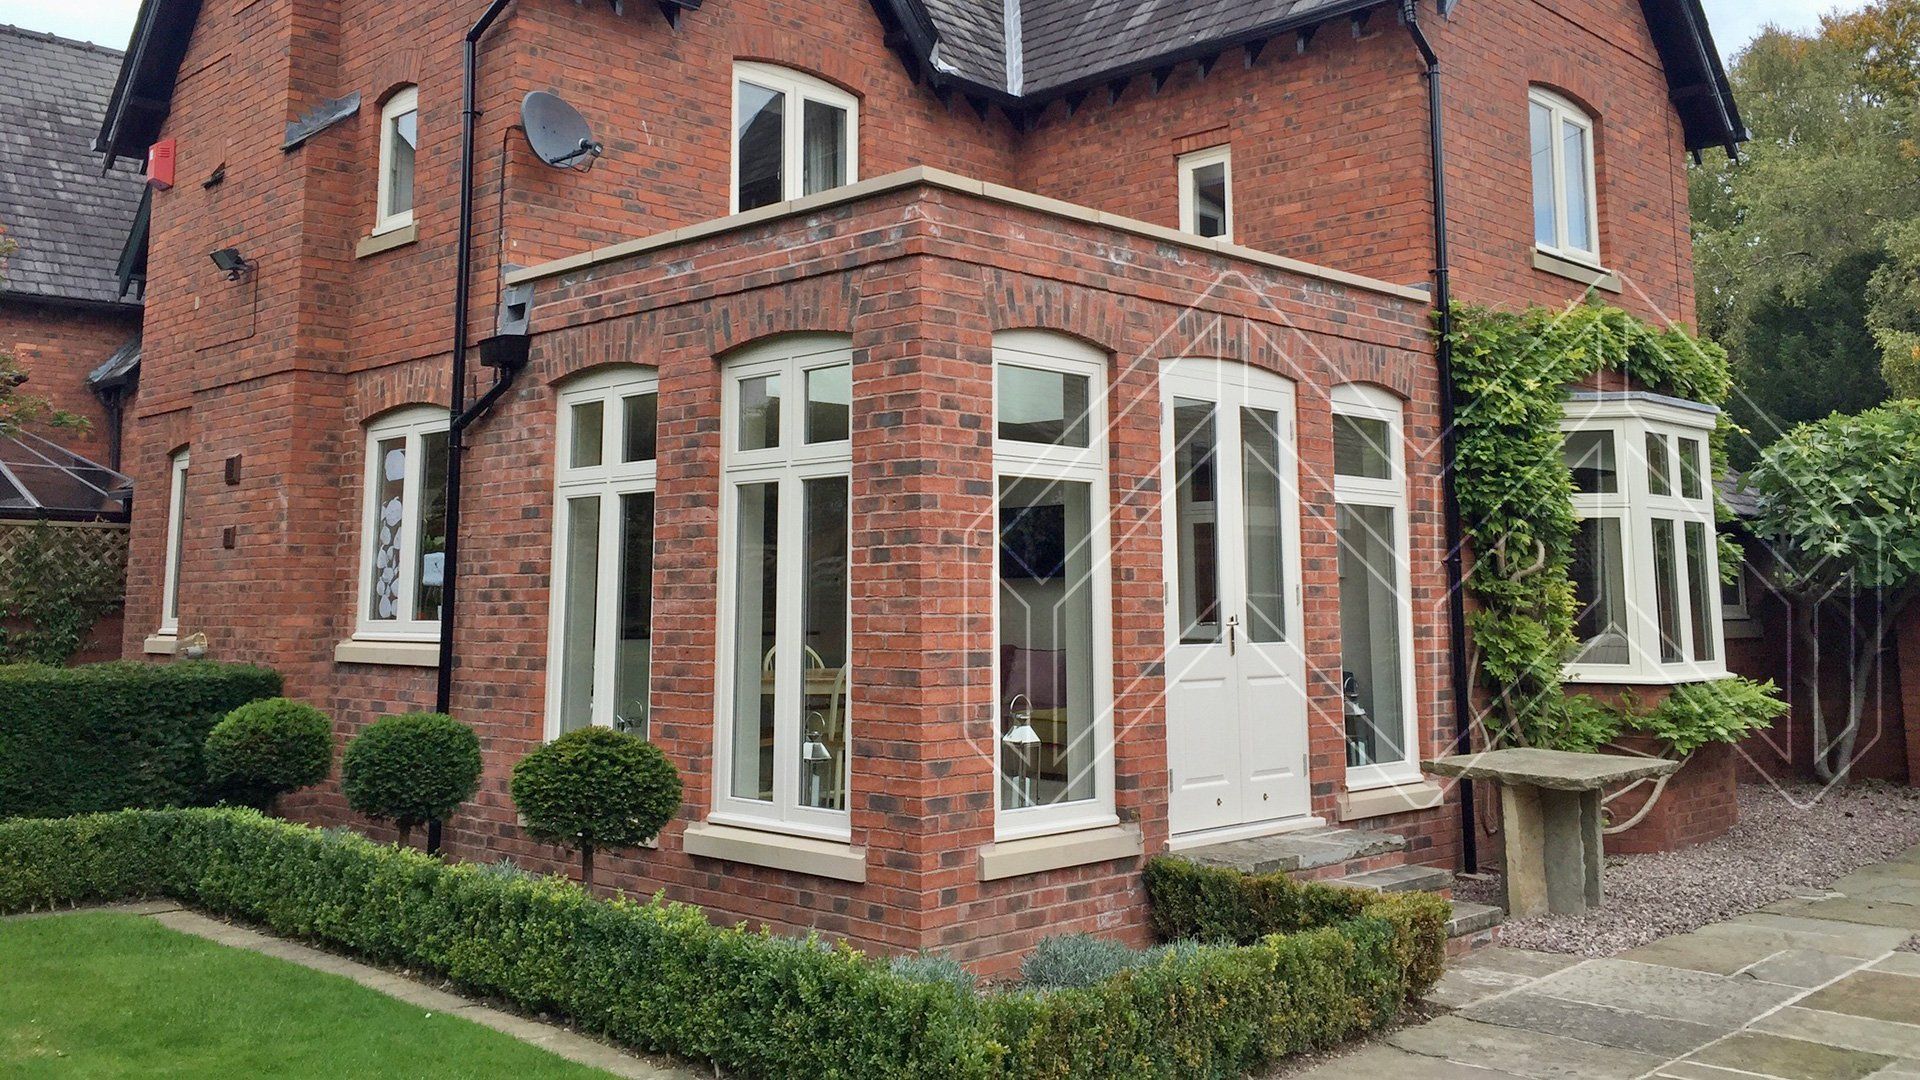 Find out more about side extensions from Mark Davenport Builders